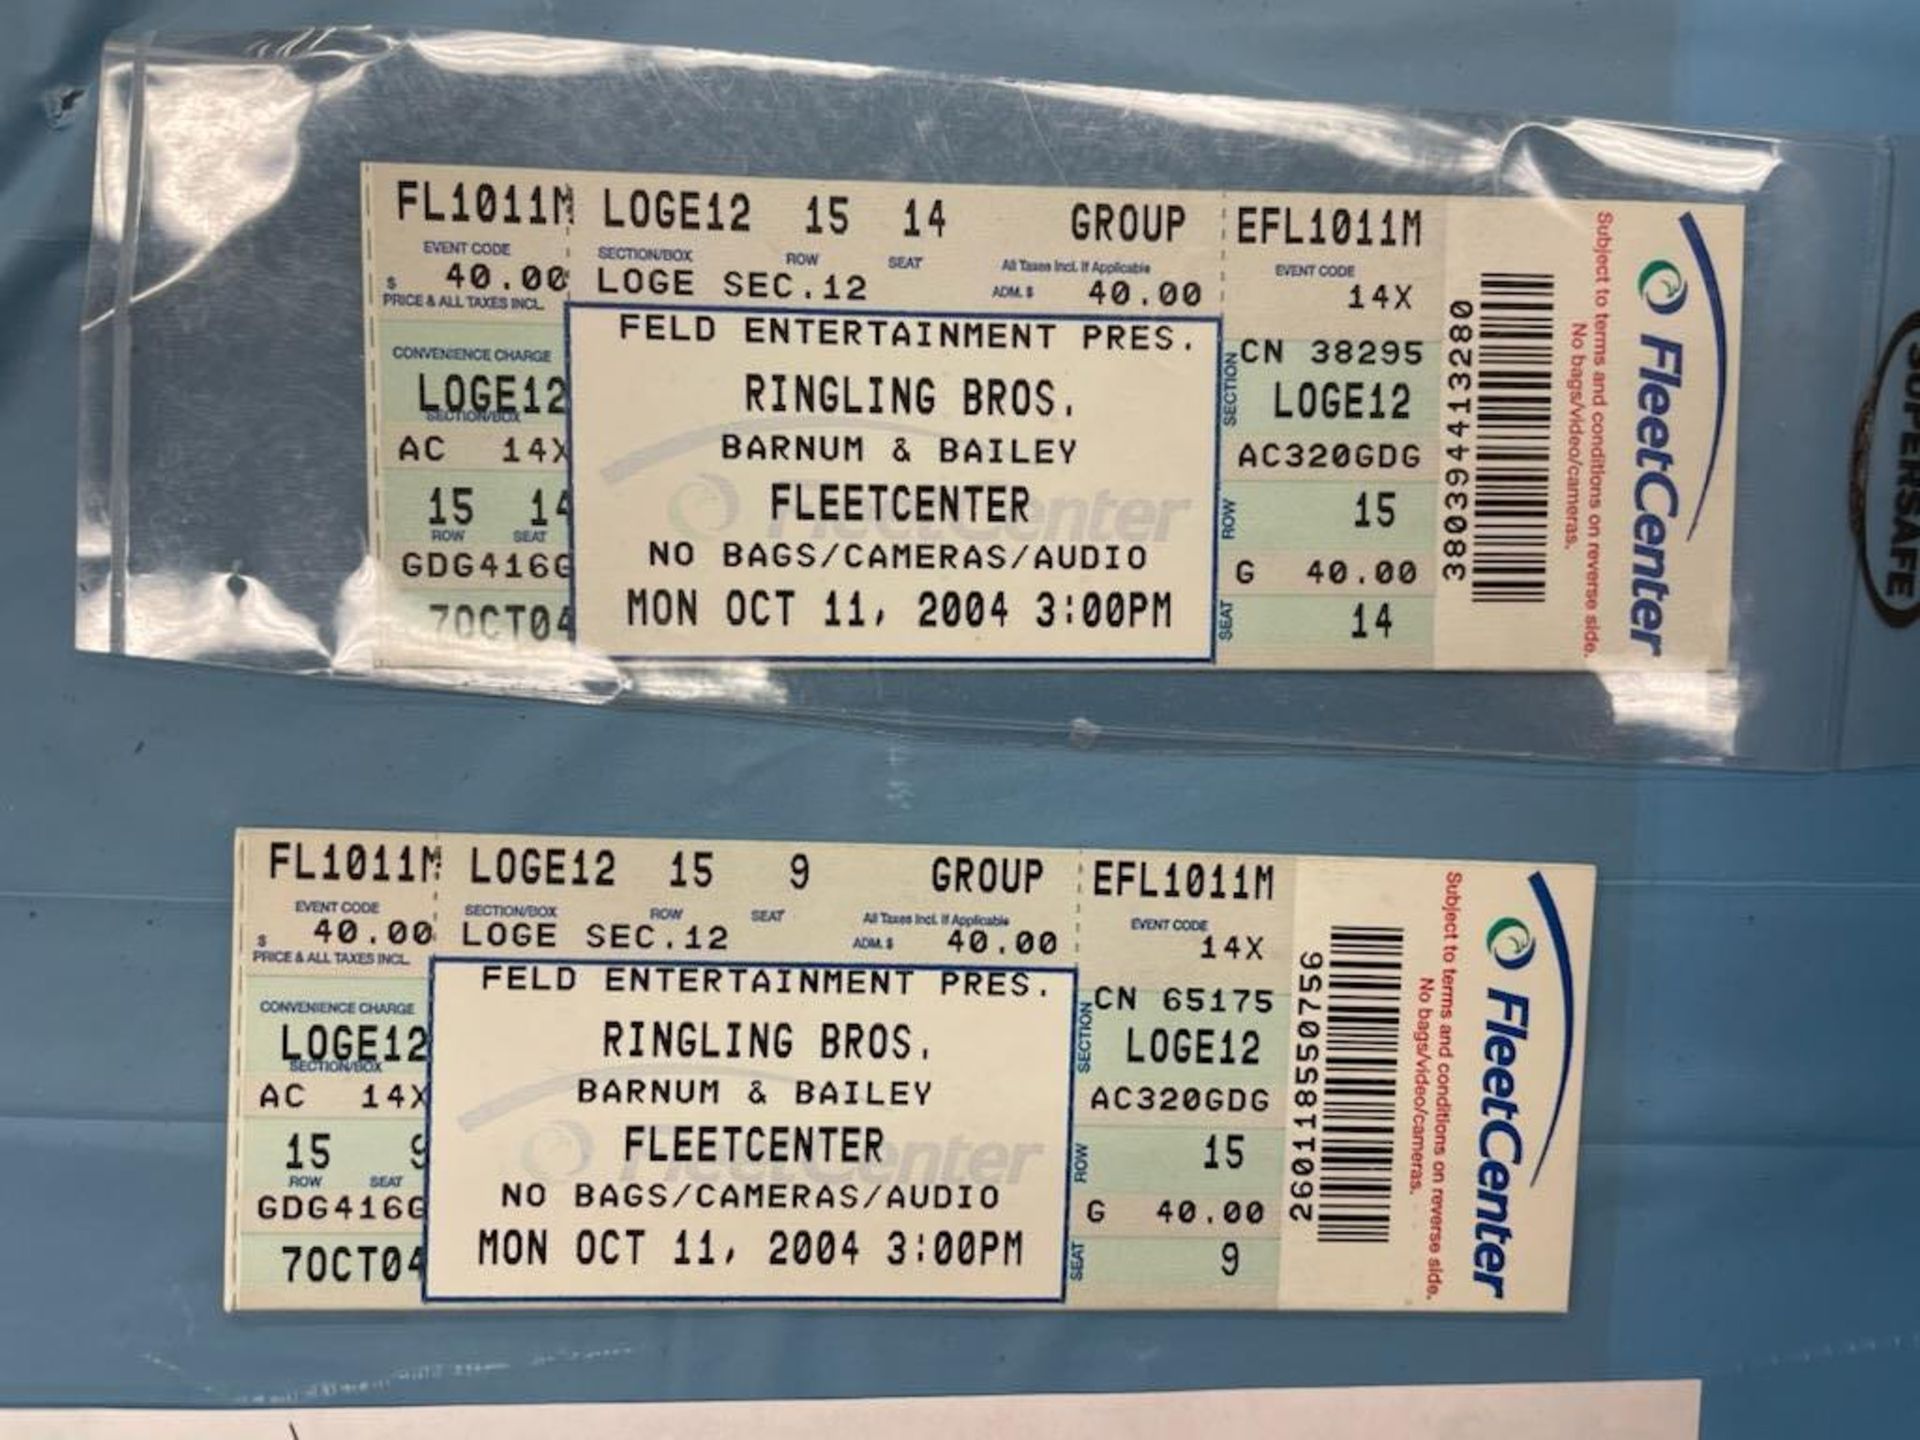 (Lot) Ringling Brothers Barnum & Bailey c/o: First Show Oct 11 2004 Feet Center Ticket, Matching